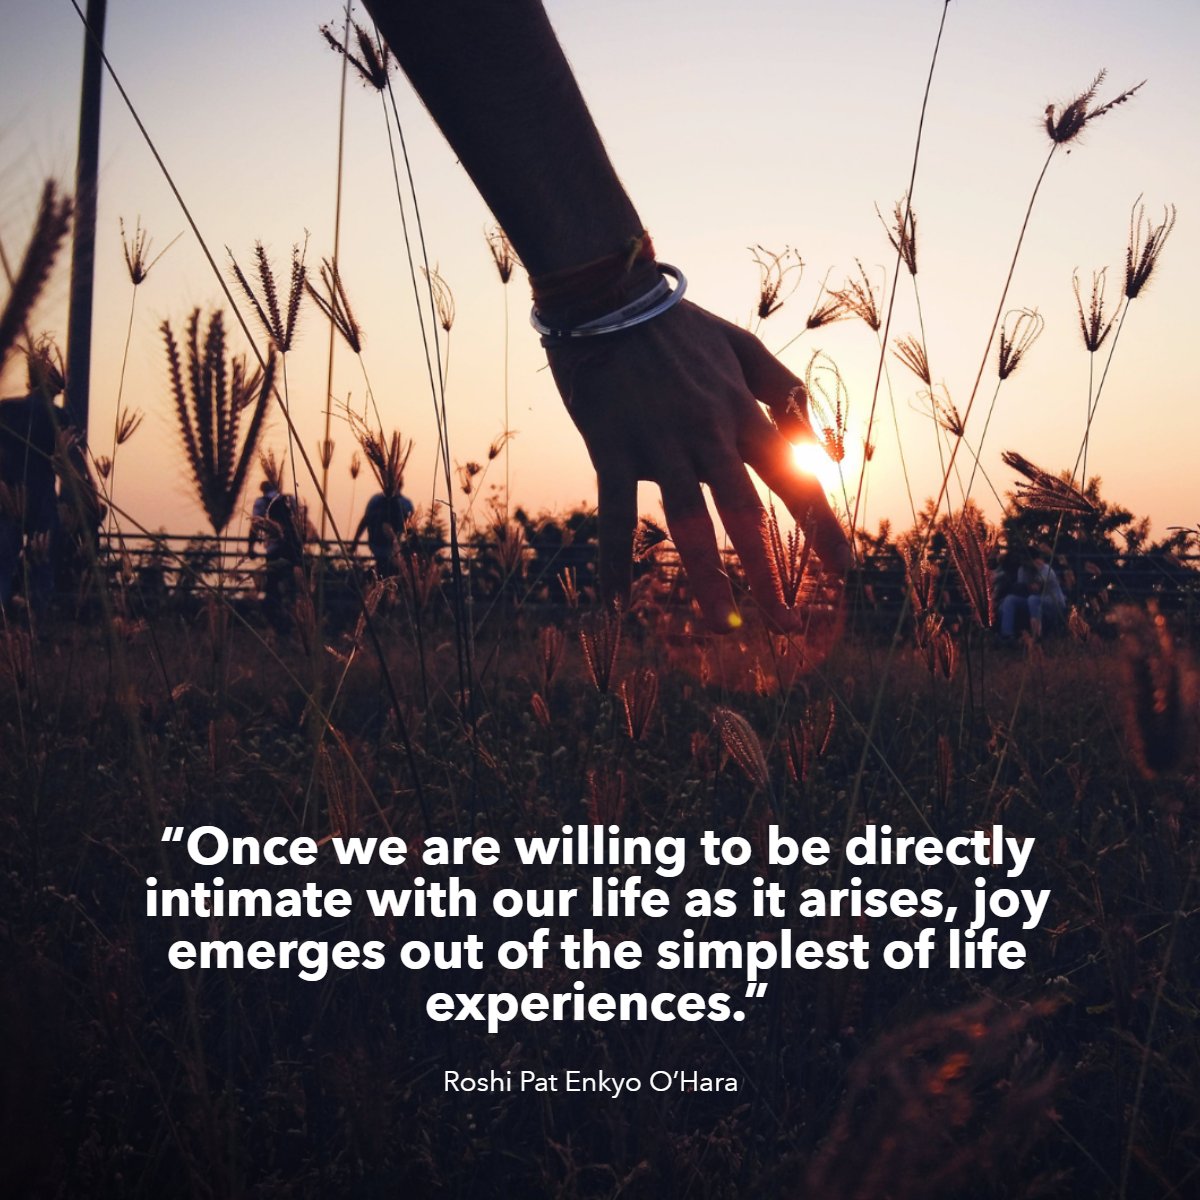 'Once we are willing to be directly intimate with our life as it arises, joy emerges out of the simplest of life experiences'
— Roshi Pat Enkya O'Hara 🤗

#quotes #happinessbegins #happinesscomesfromwithin #happiness❤️ #happinessiskey #quotestagram